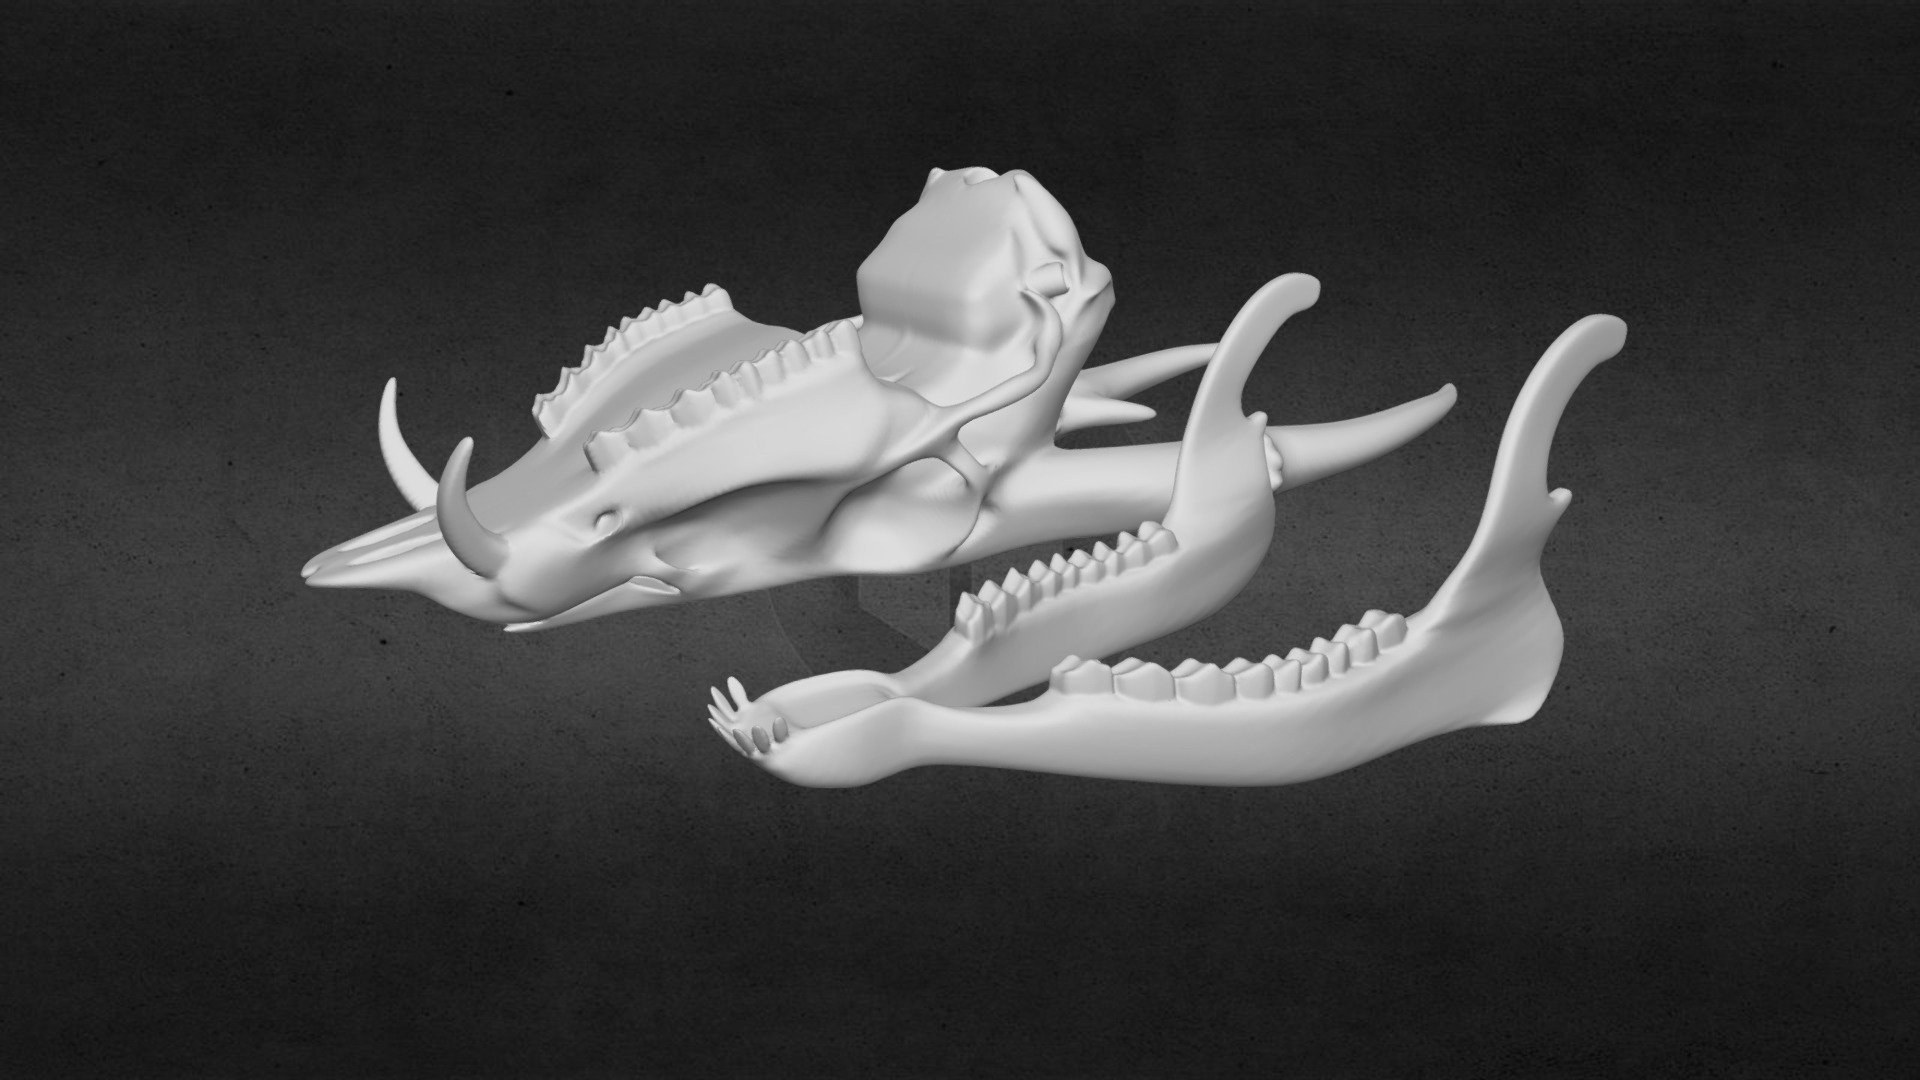 3D model Muntjac Skull (Chinese Water Deer) [For 3DPrint] - This is a 3D model of the Muntjac Skull (Chinese Water Deer) [For 3DPrint]. The 3D model is about a white skull with a black background.